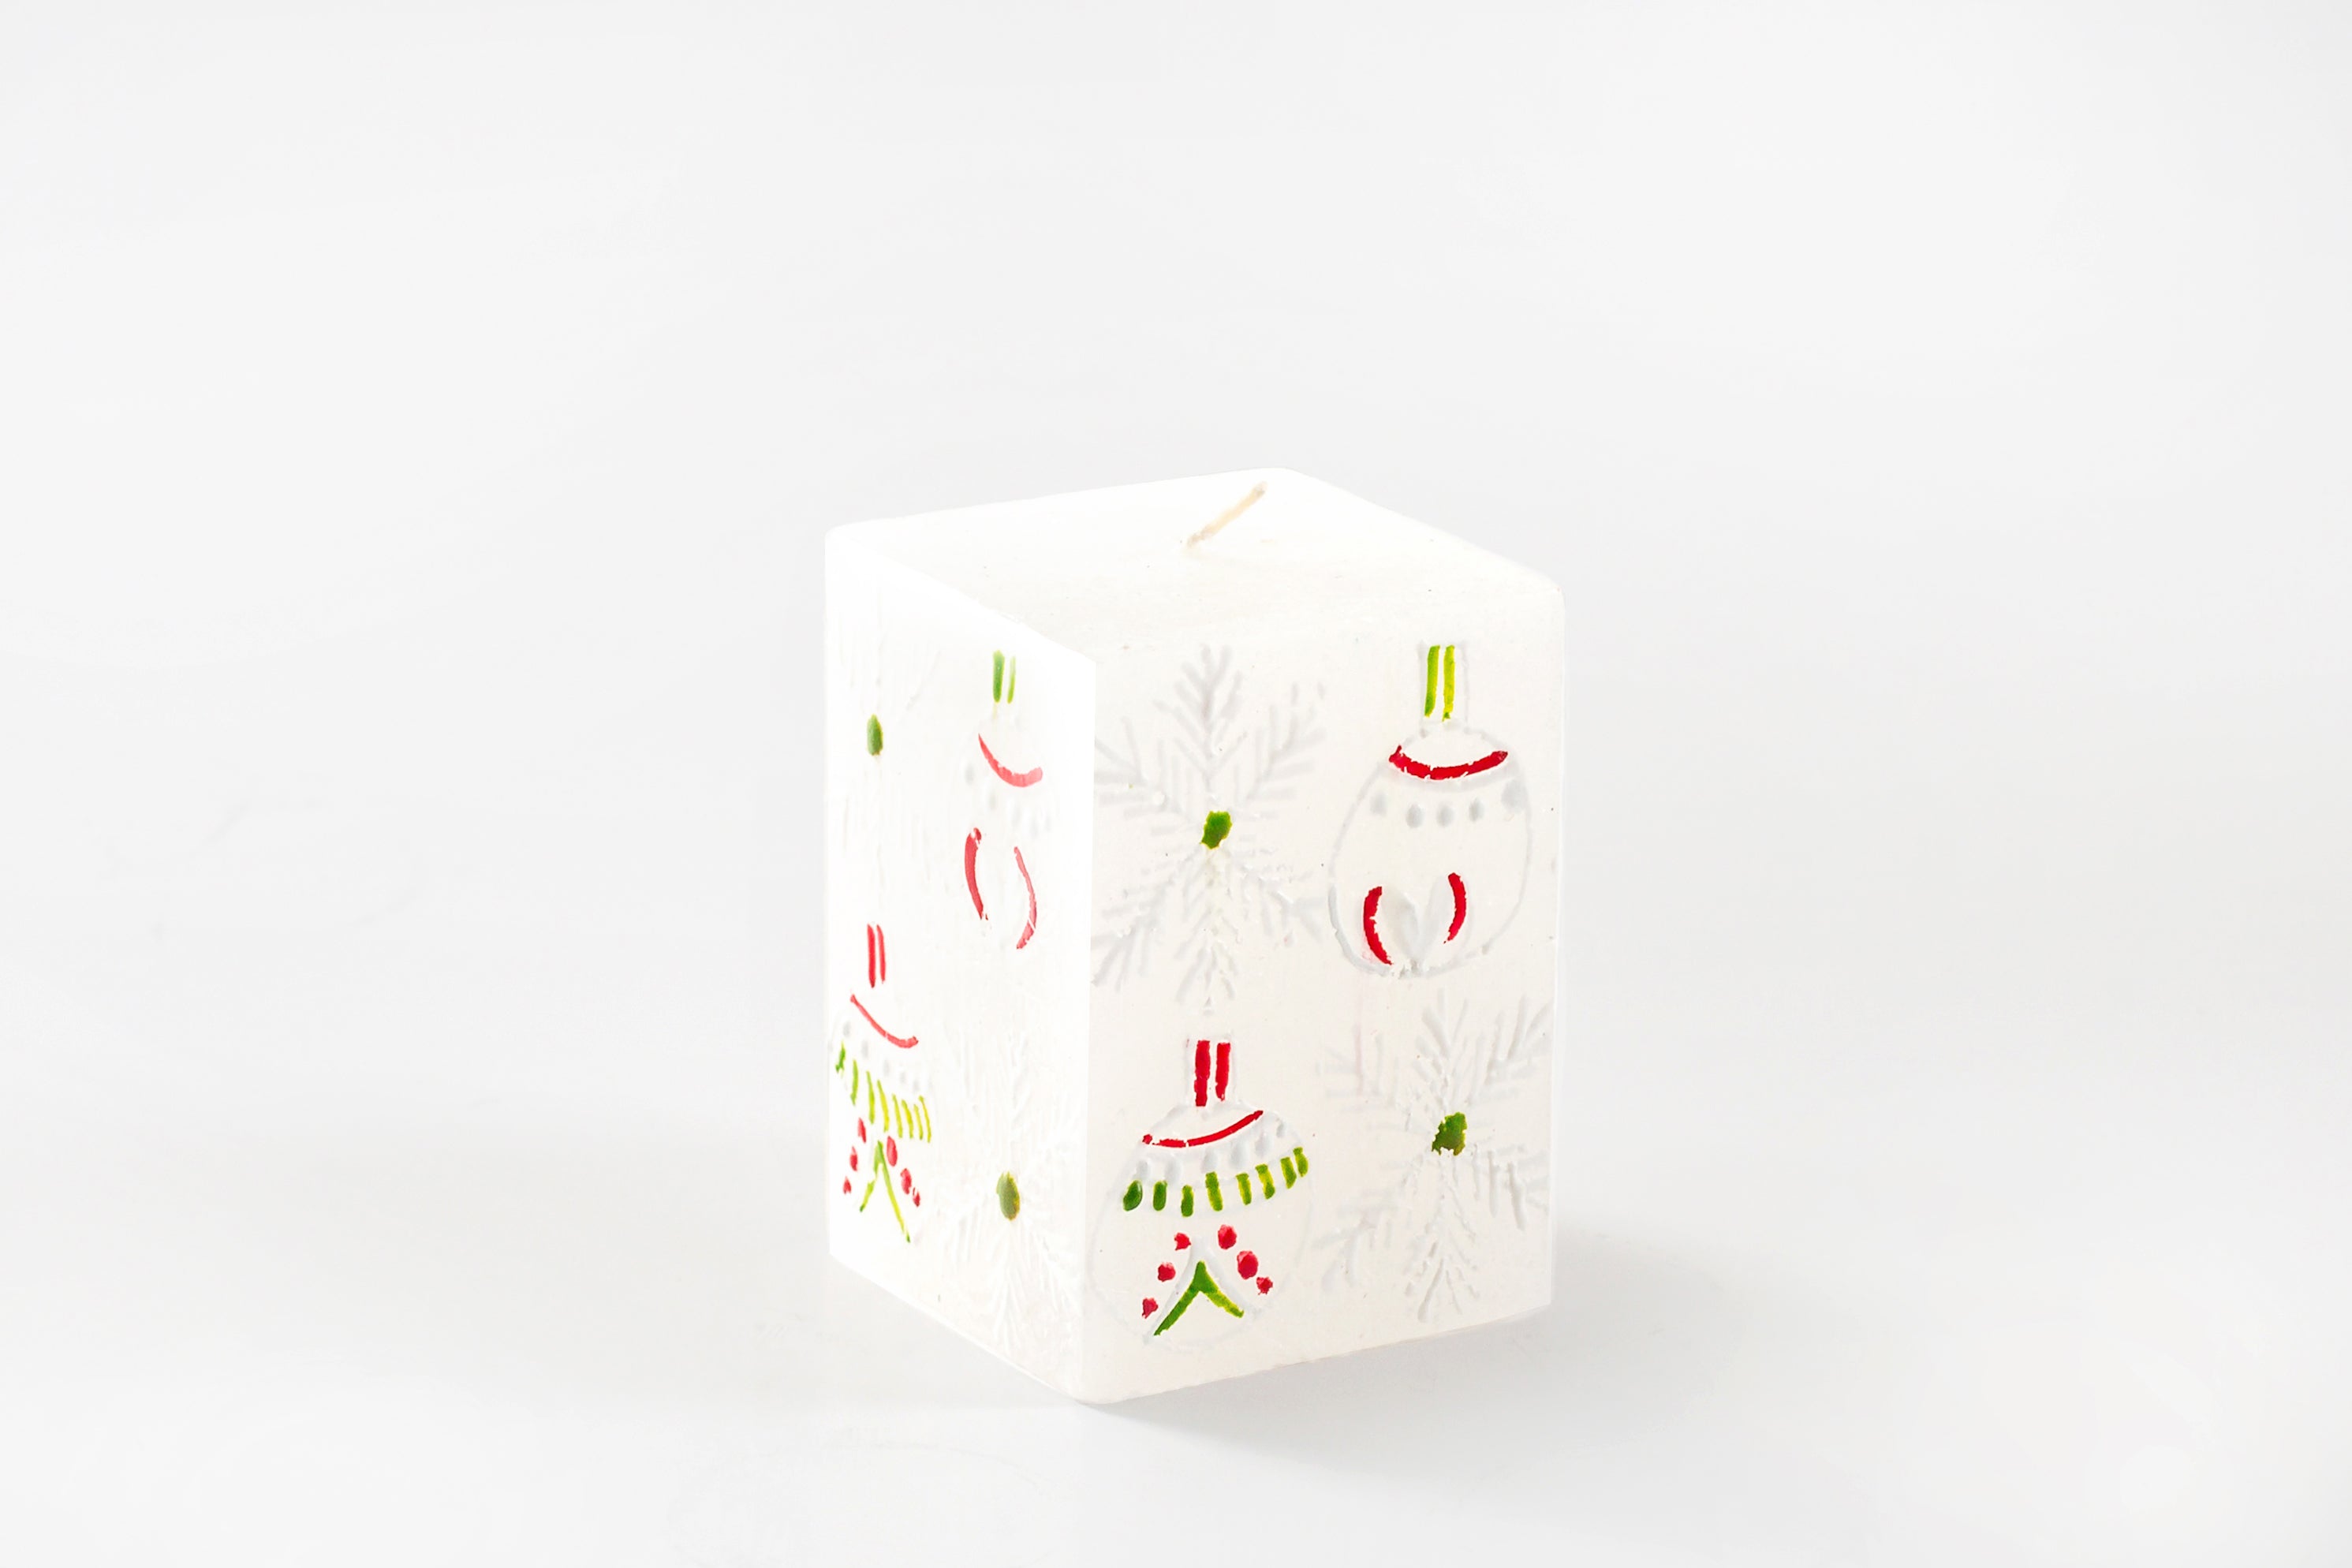 Whimsy Christmas 2" x 2' x 3" cubed candle. This one has a white base and hand painted with trees, snow flakes and Christmas ornaments painted in red, green and/or white.